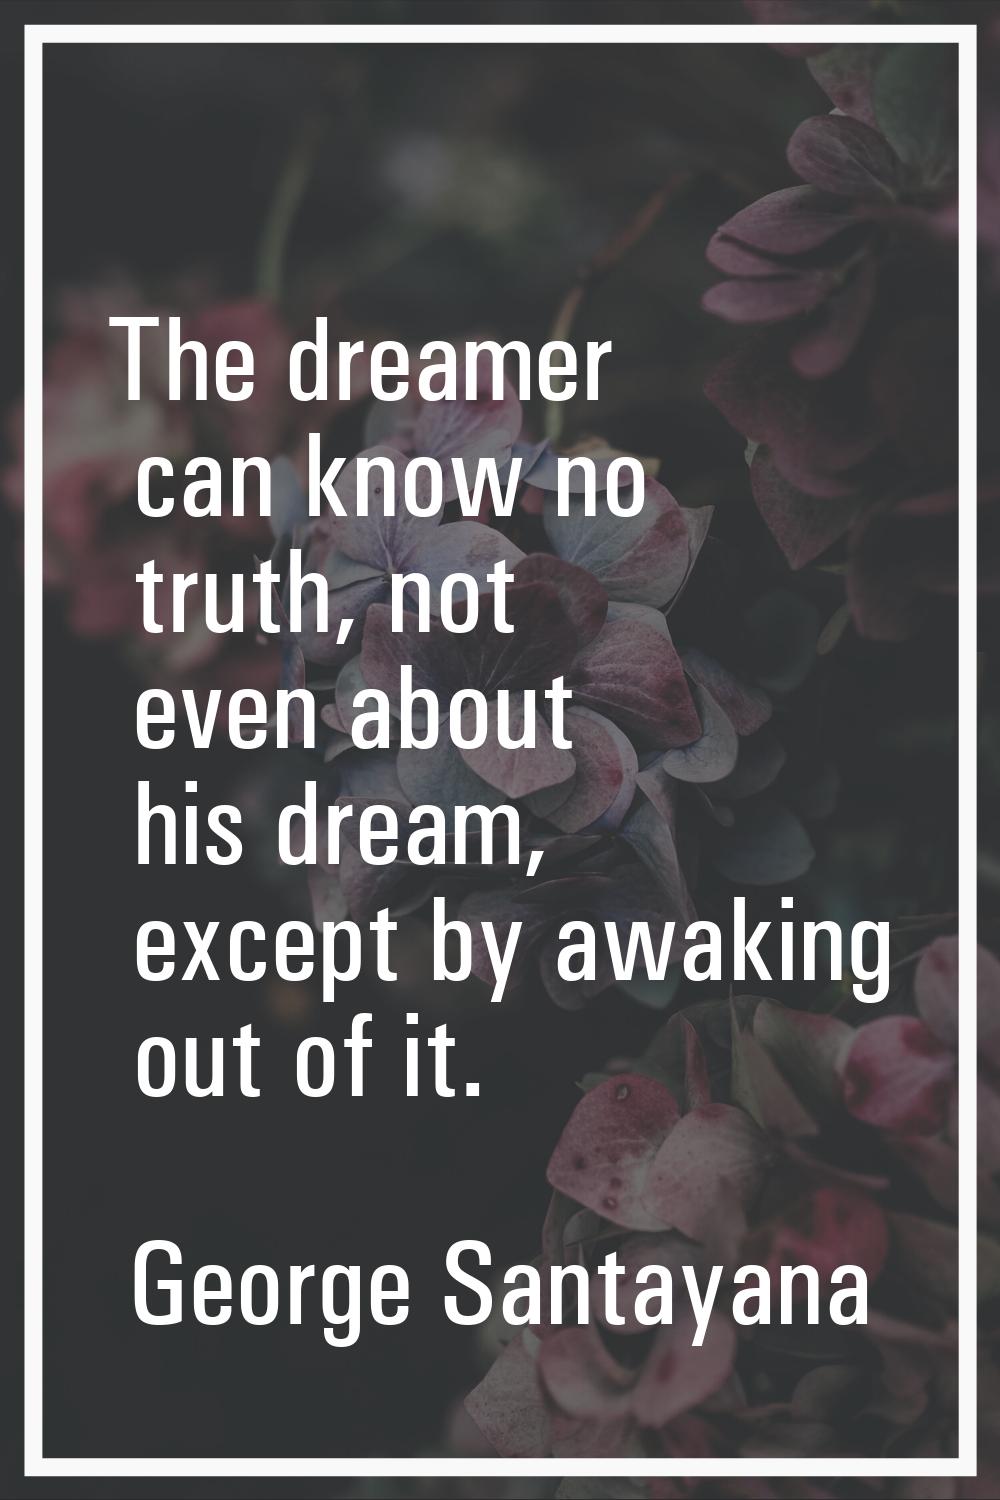 The dreamer can know no truth, not even about his dream, except by awaking out of it.